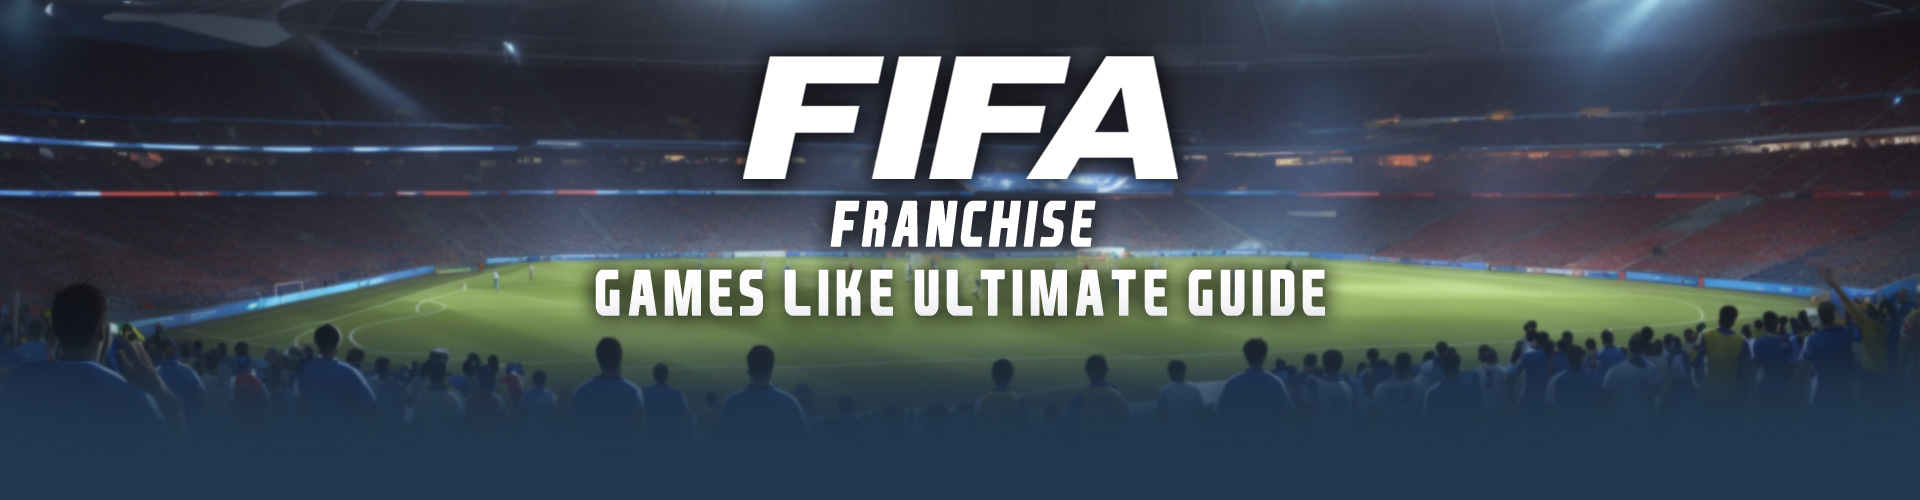 FIFA Serie: The Best Football Games Franchise